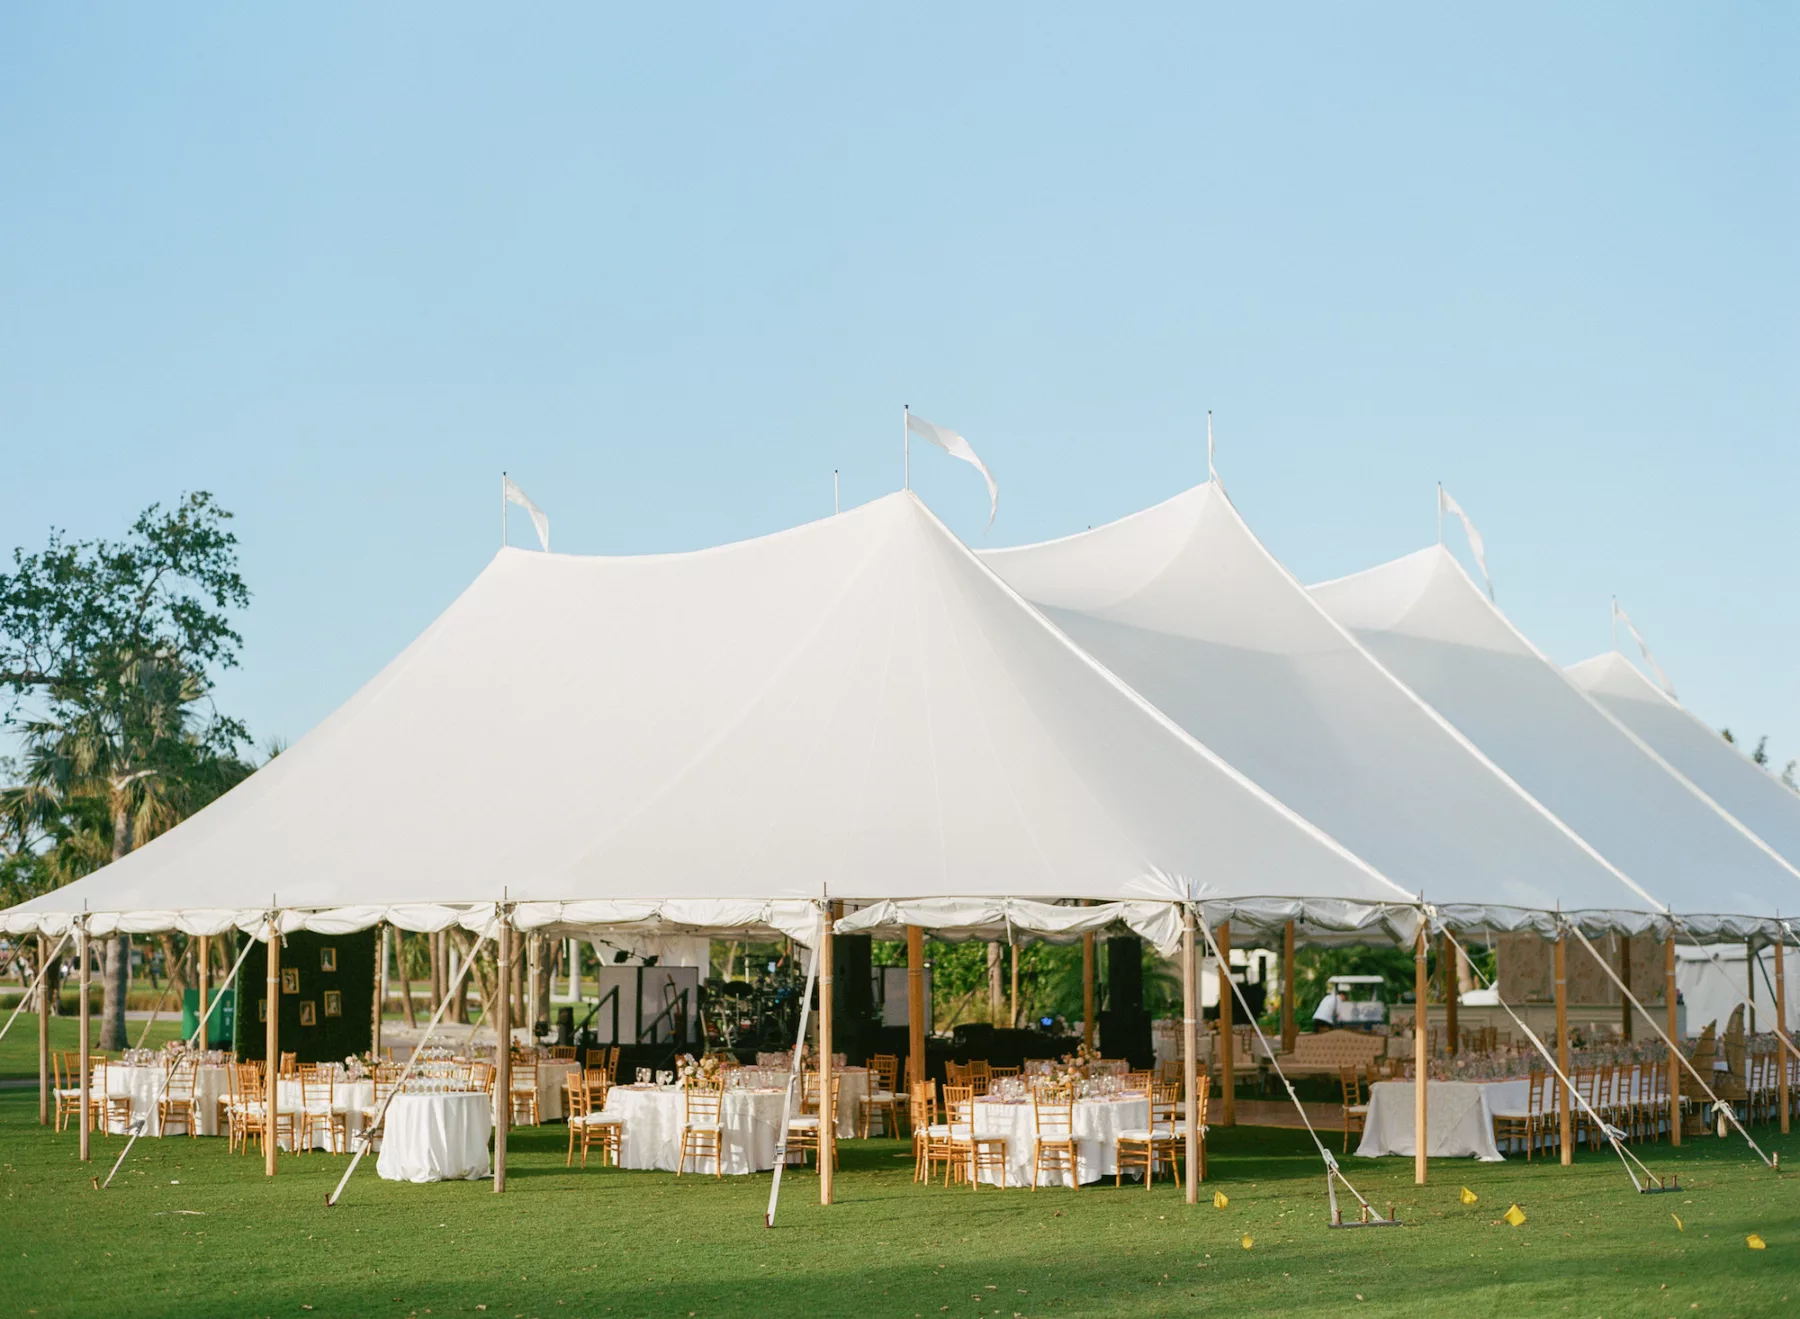 Luxurious Tented Old Florida Wedding Reception Ideas | Tampa Bay Event Venue The Resort at Longboat Key Club